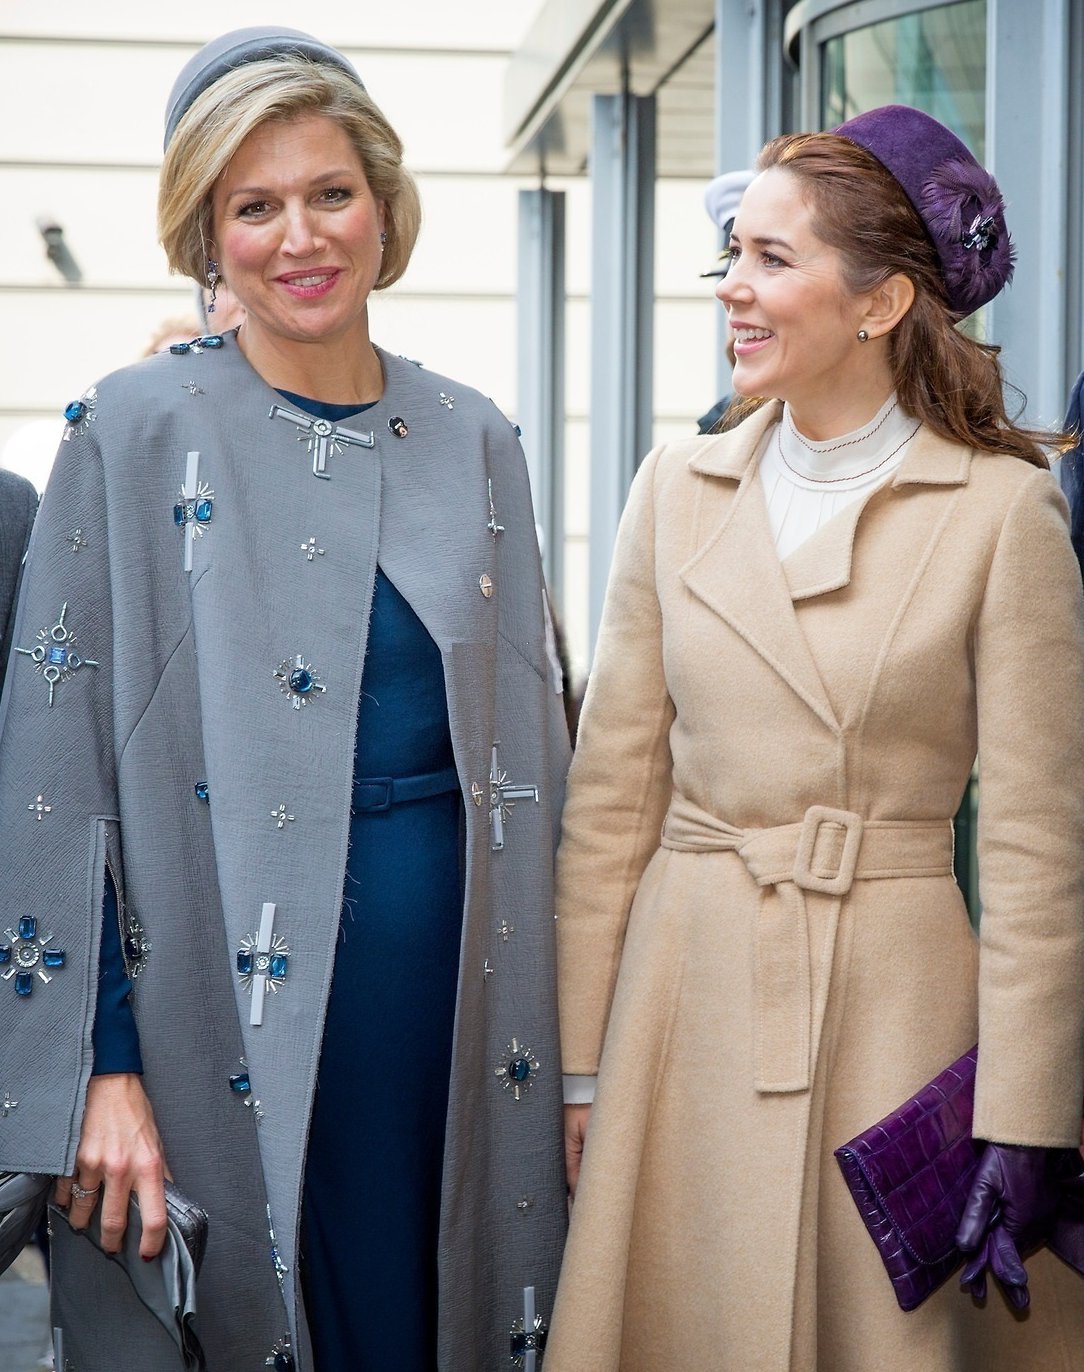 King Willem-Alexander and Queen Maxima State visits Denmark